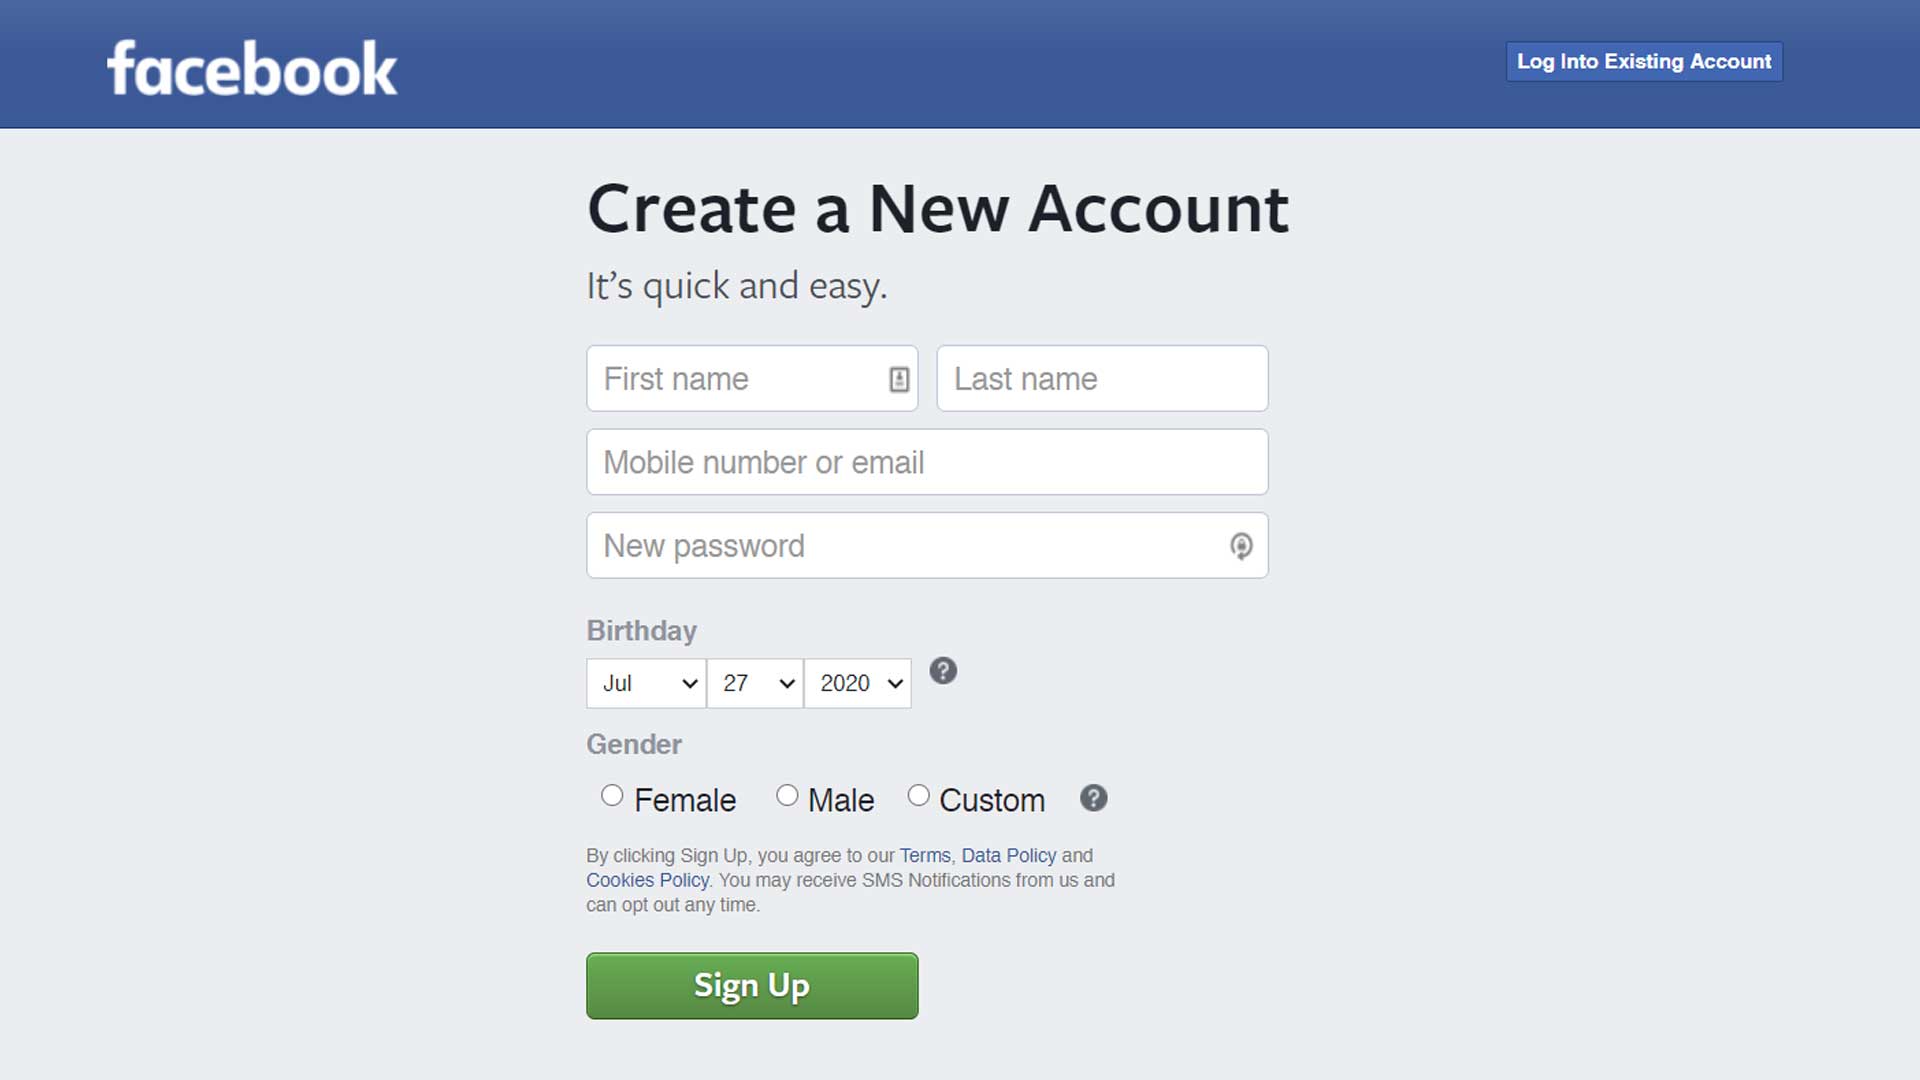 social media setup is usually fast and free and easy. The facebook sign up page is no exception.